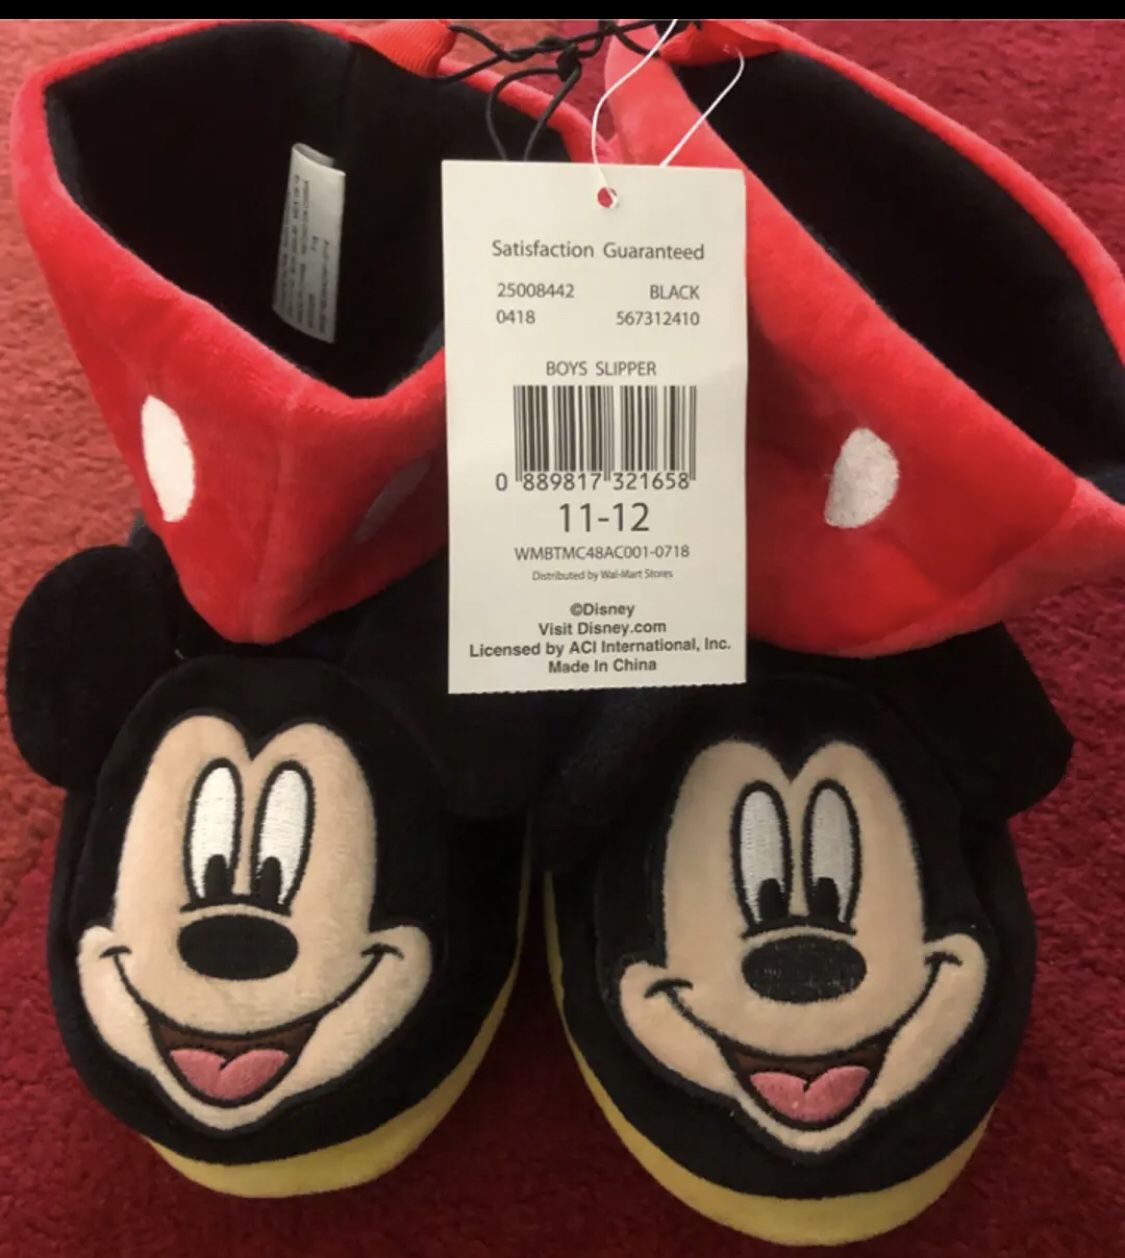 New Mickey Mouse Disney Boot Slippers size 11-12 Boys Toddler (pick up only)